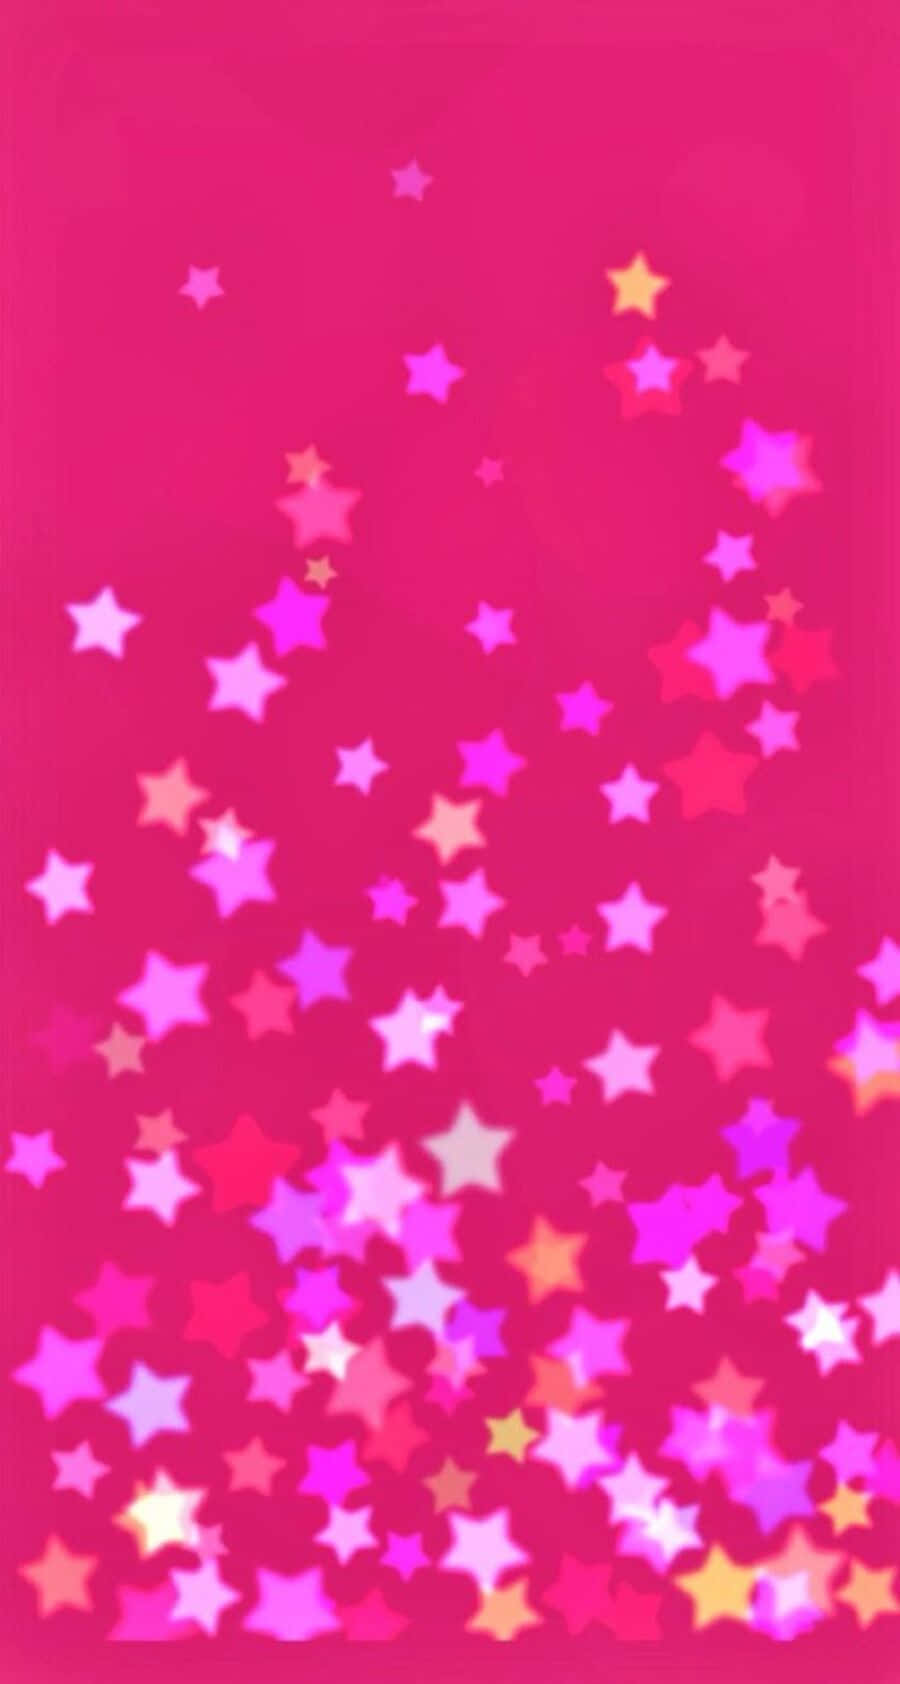 Dreamy Pink Stars In The Night Sky Background